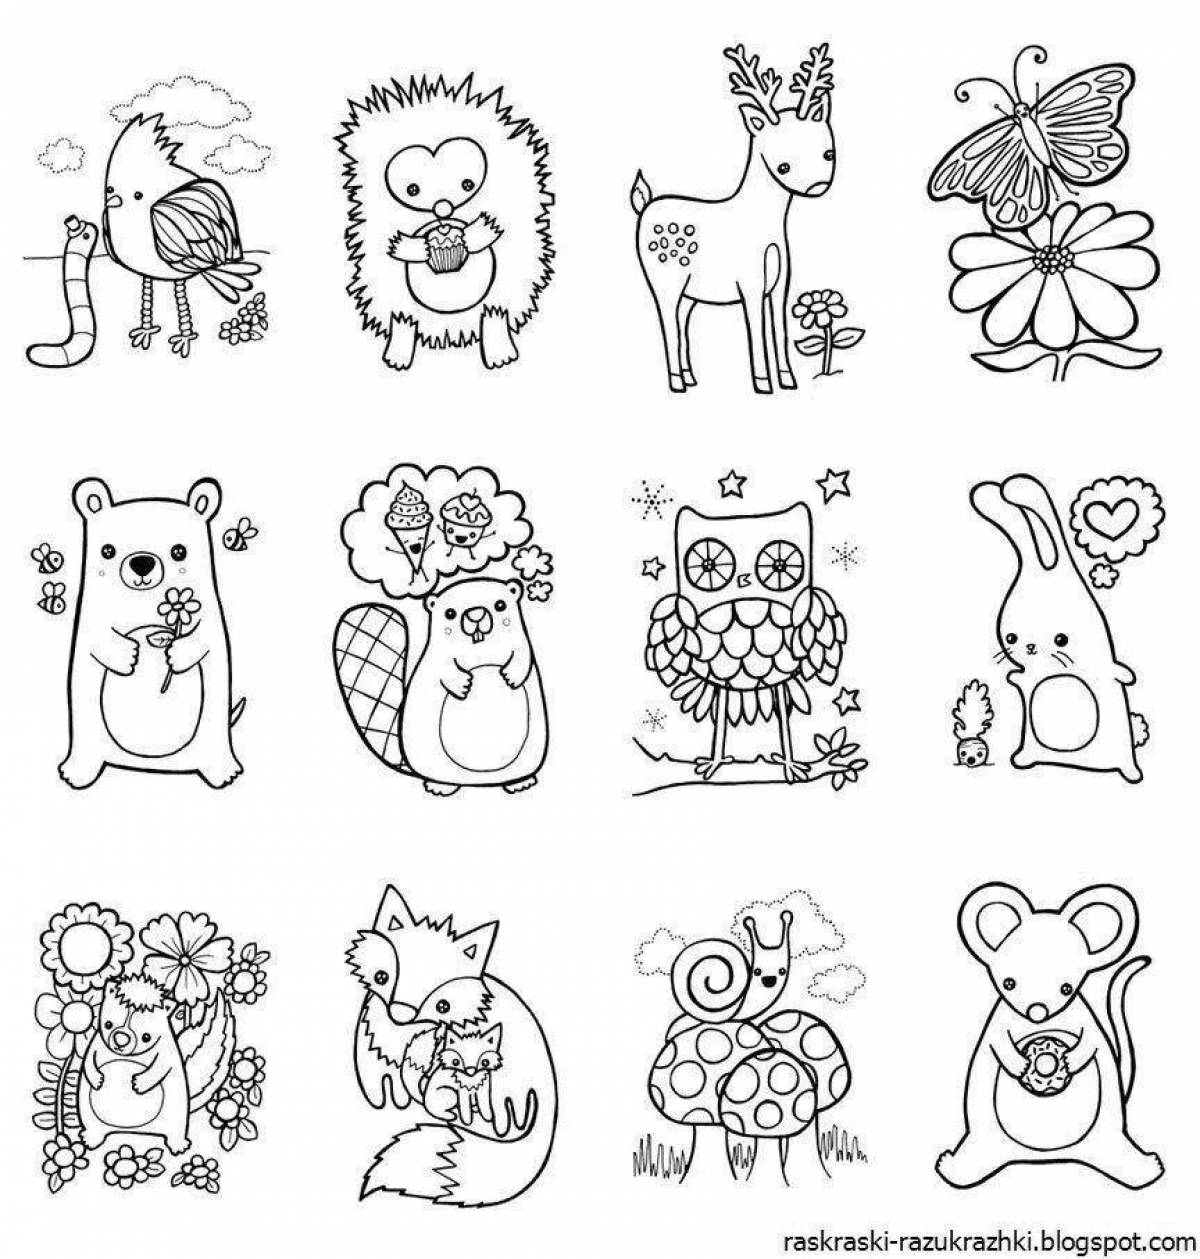 Colorful many small coloring pages